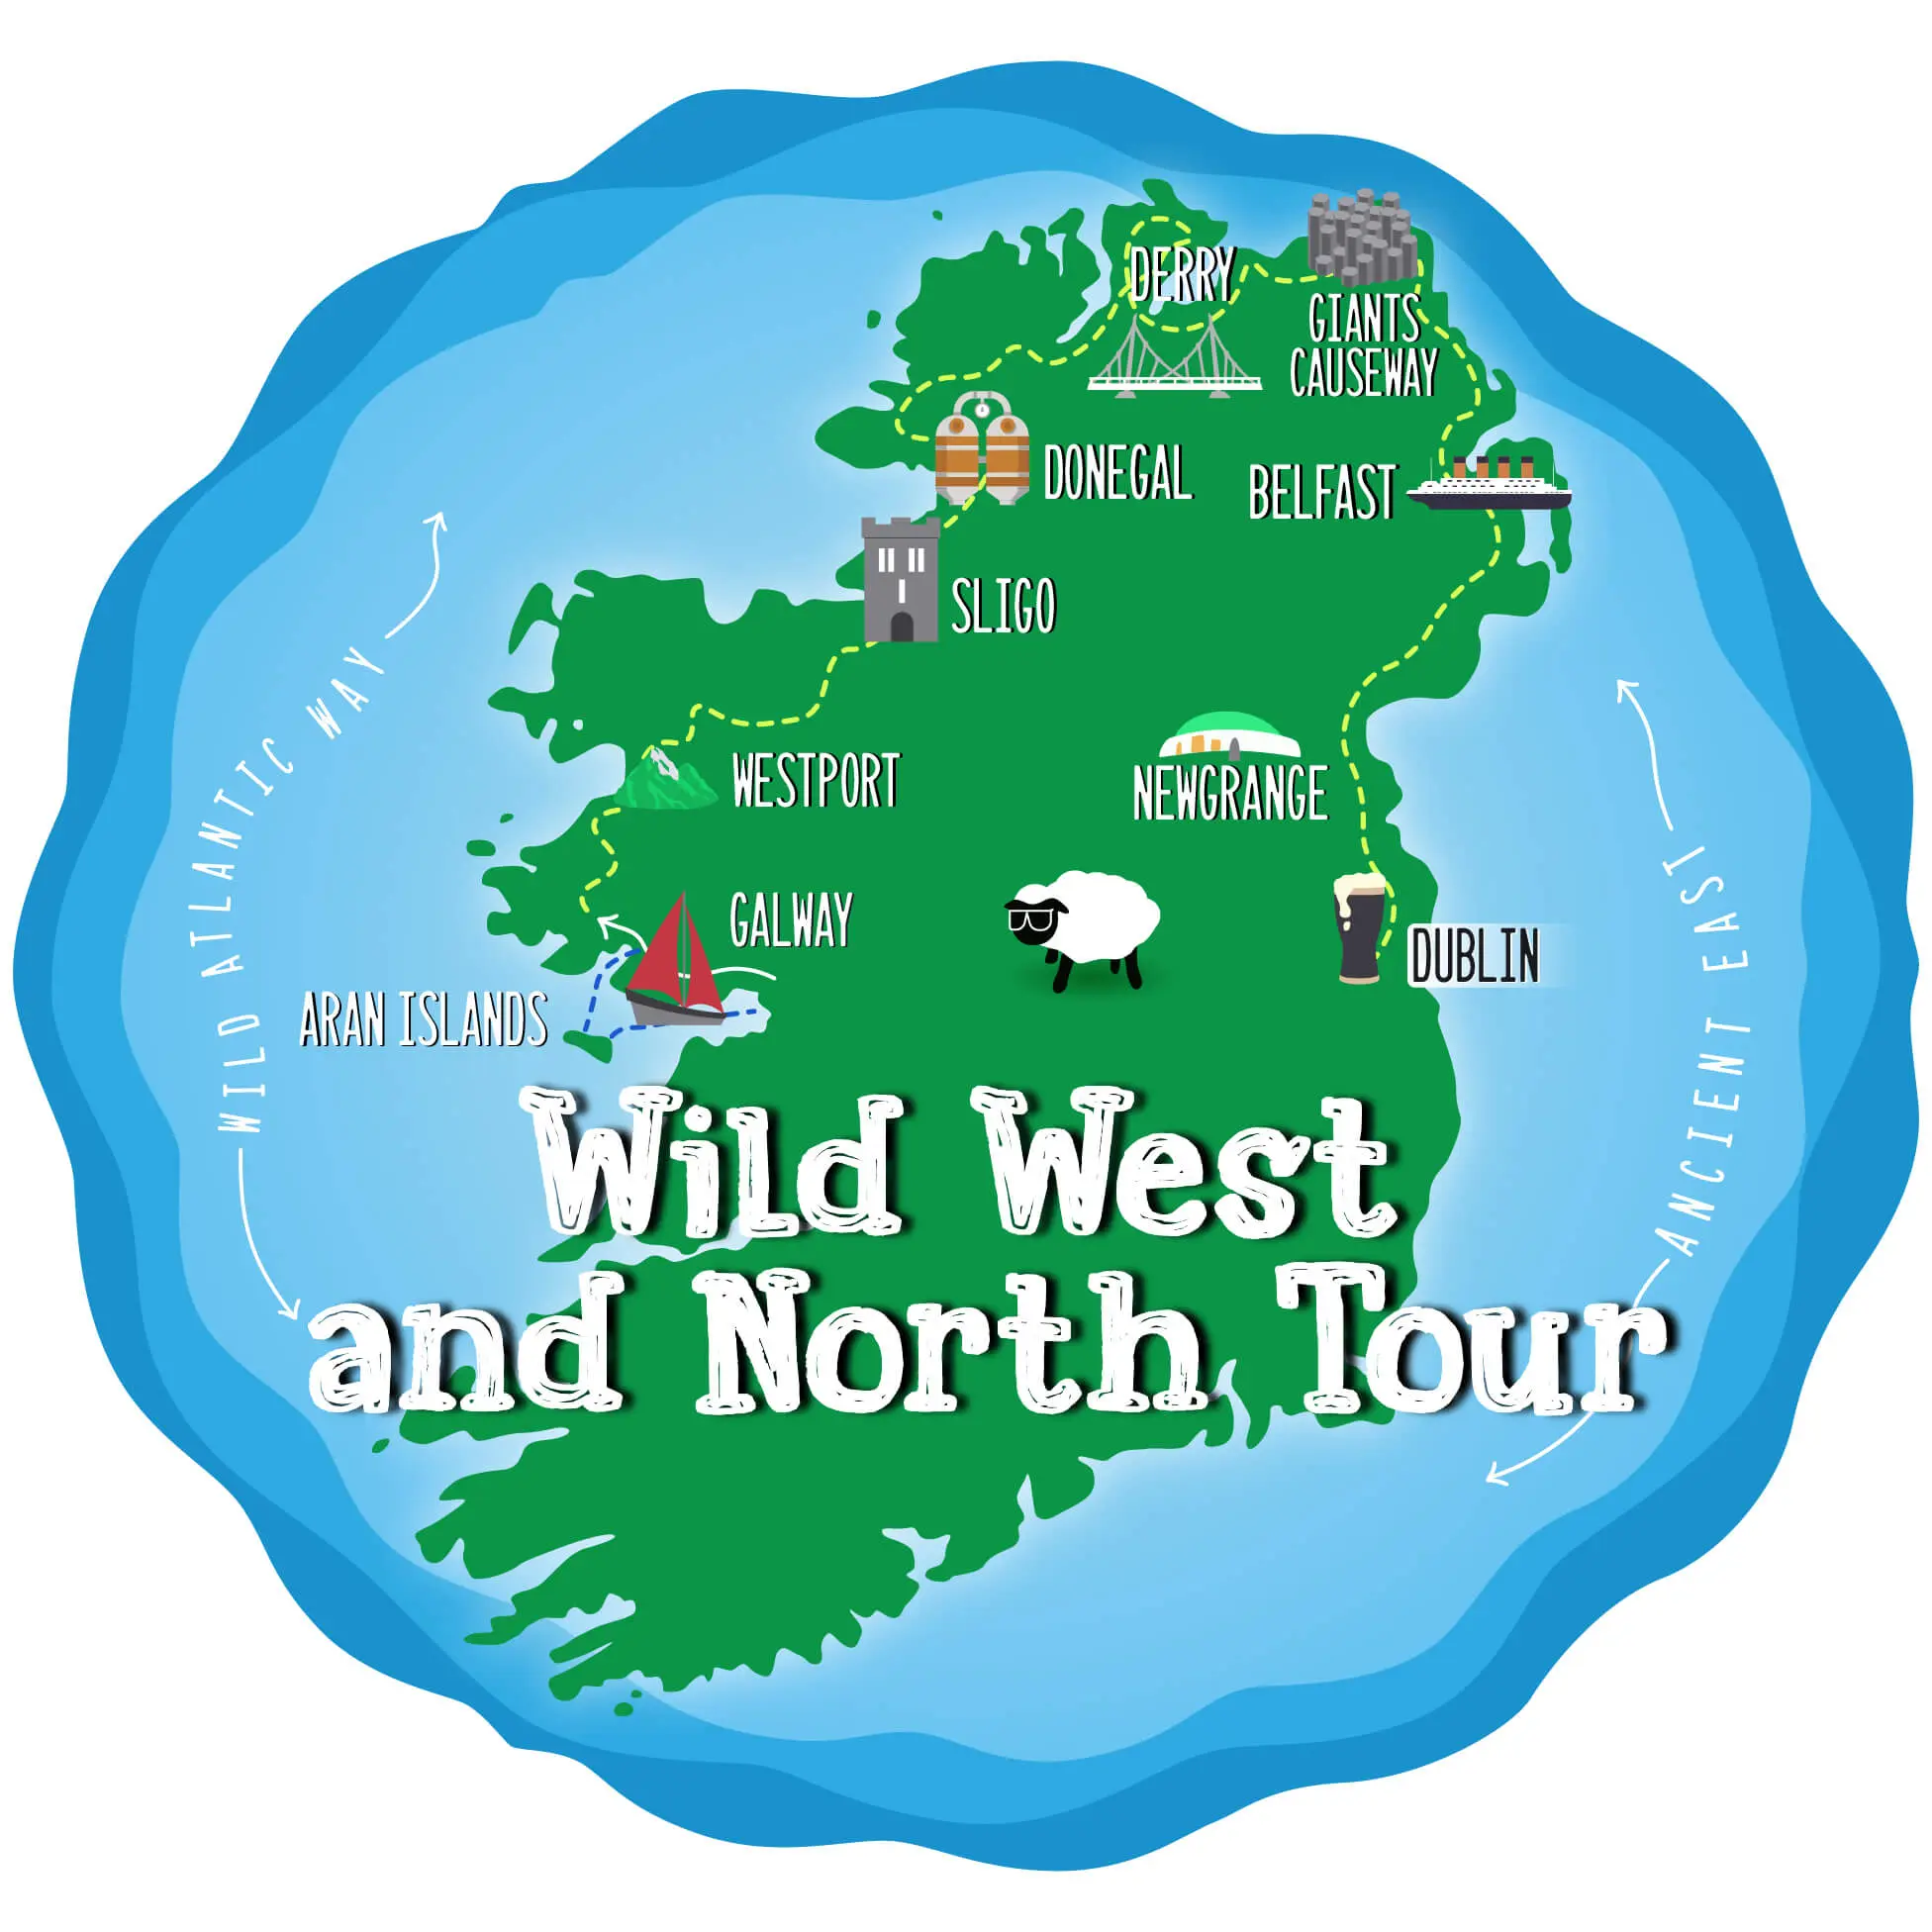 Illustrated map of Ireland highlighting a "Wild West and North Tour" with key destinations marked, including Donegal, Giant's Causeway, Belfast, Dublin, Newgrange, Galway, West